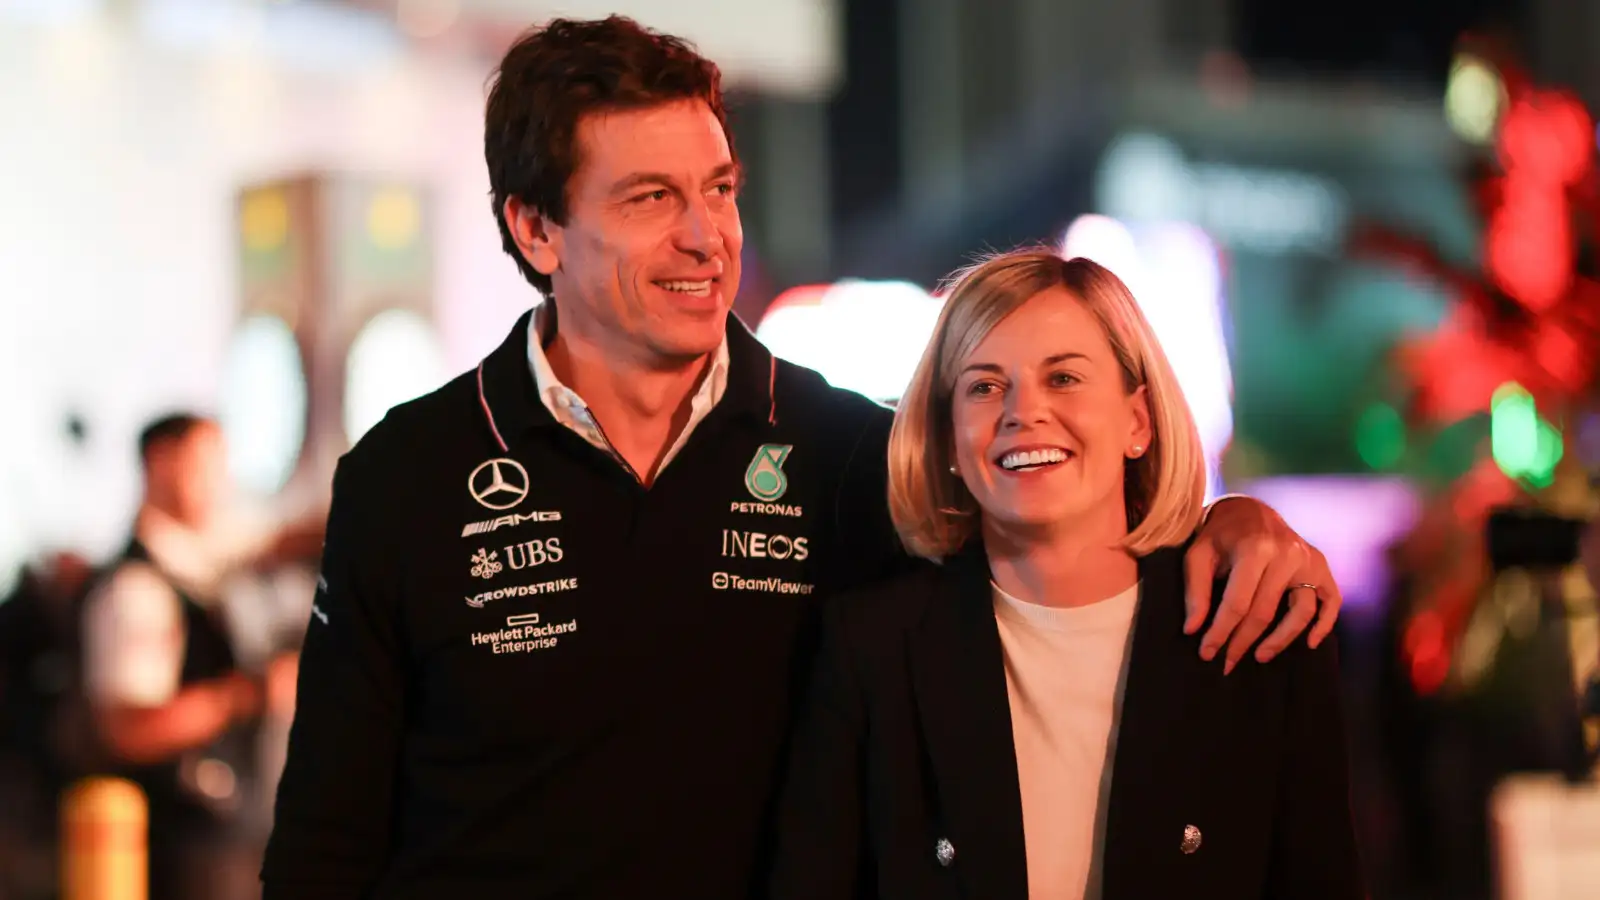 Mercedes' team boss Toto Wolff pictured with his wife, F1 Academy director Susie Wolff, in Las Vegas.